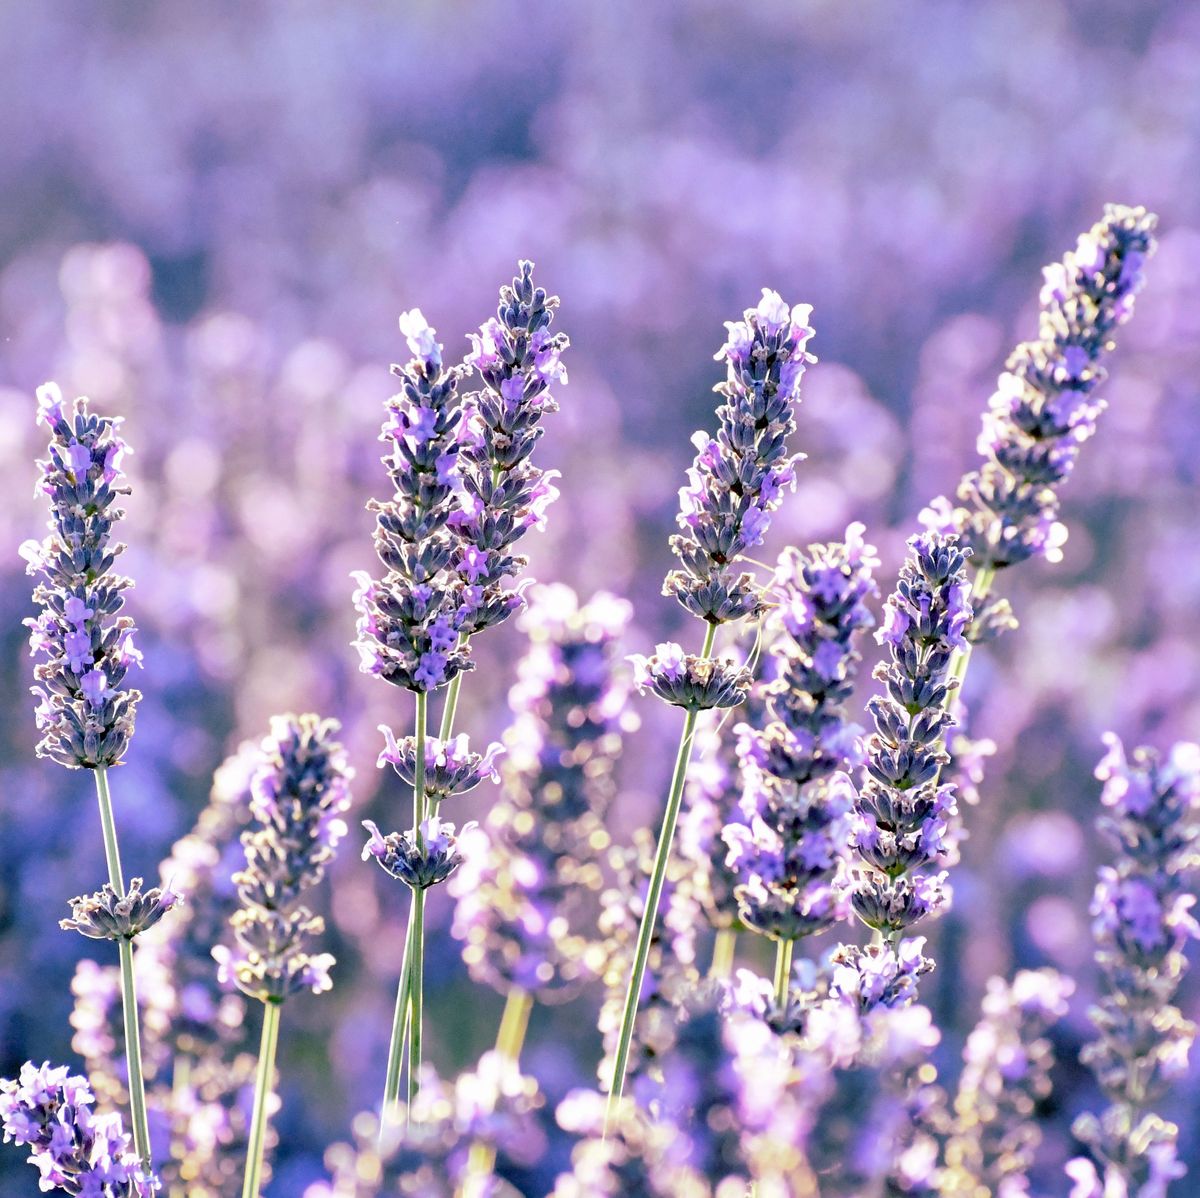 How to Grow Lavender - A Care Guide for Lavender Plants